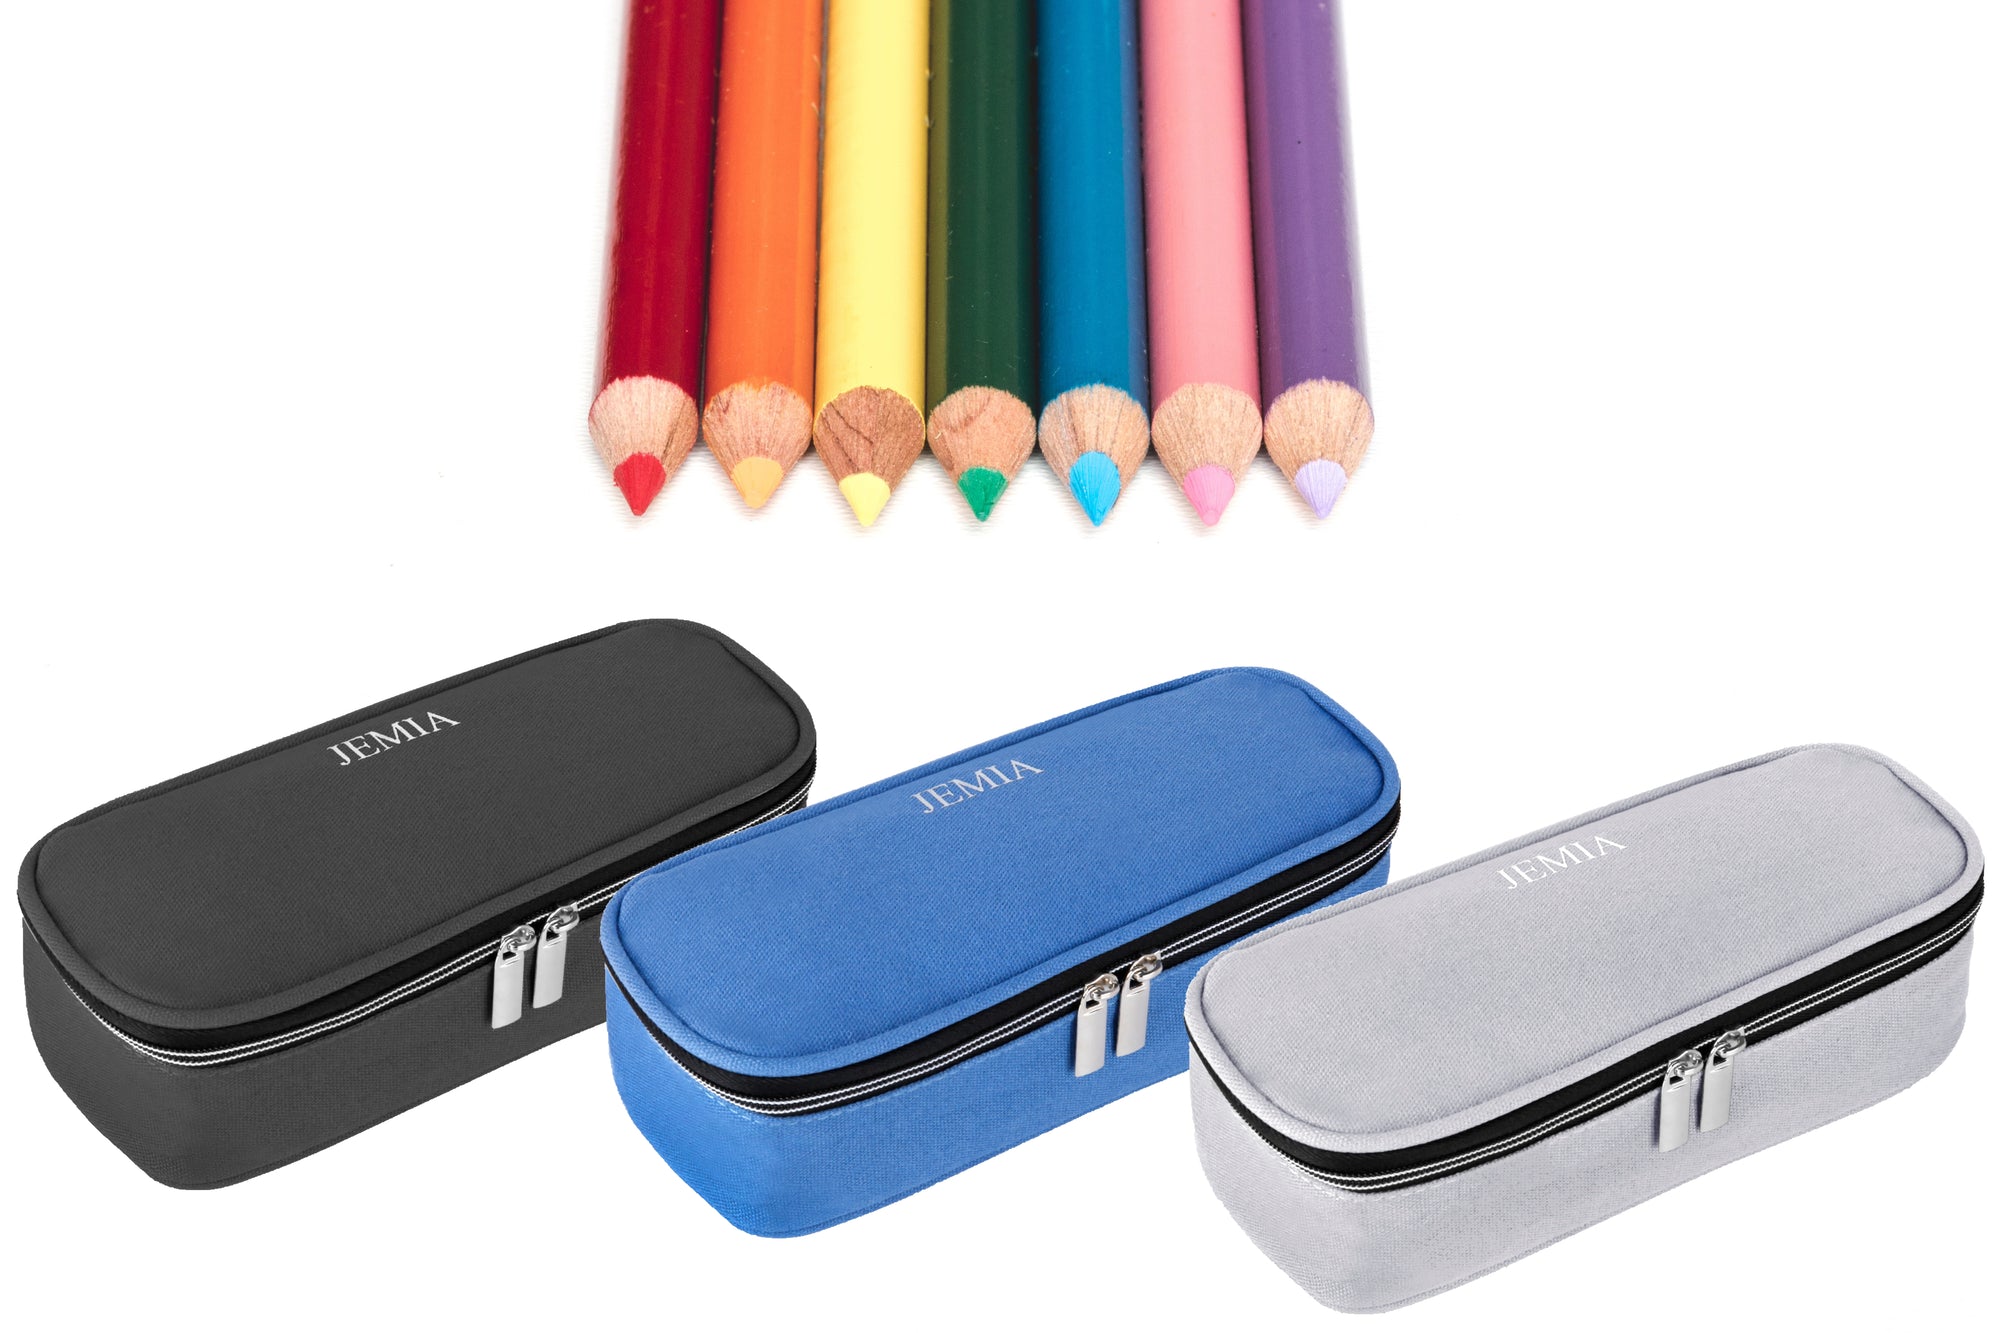 Three New Color Variation for Plain Pencil Case with Open Flip Style